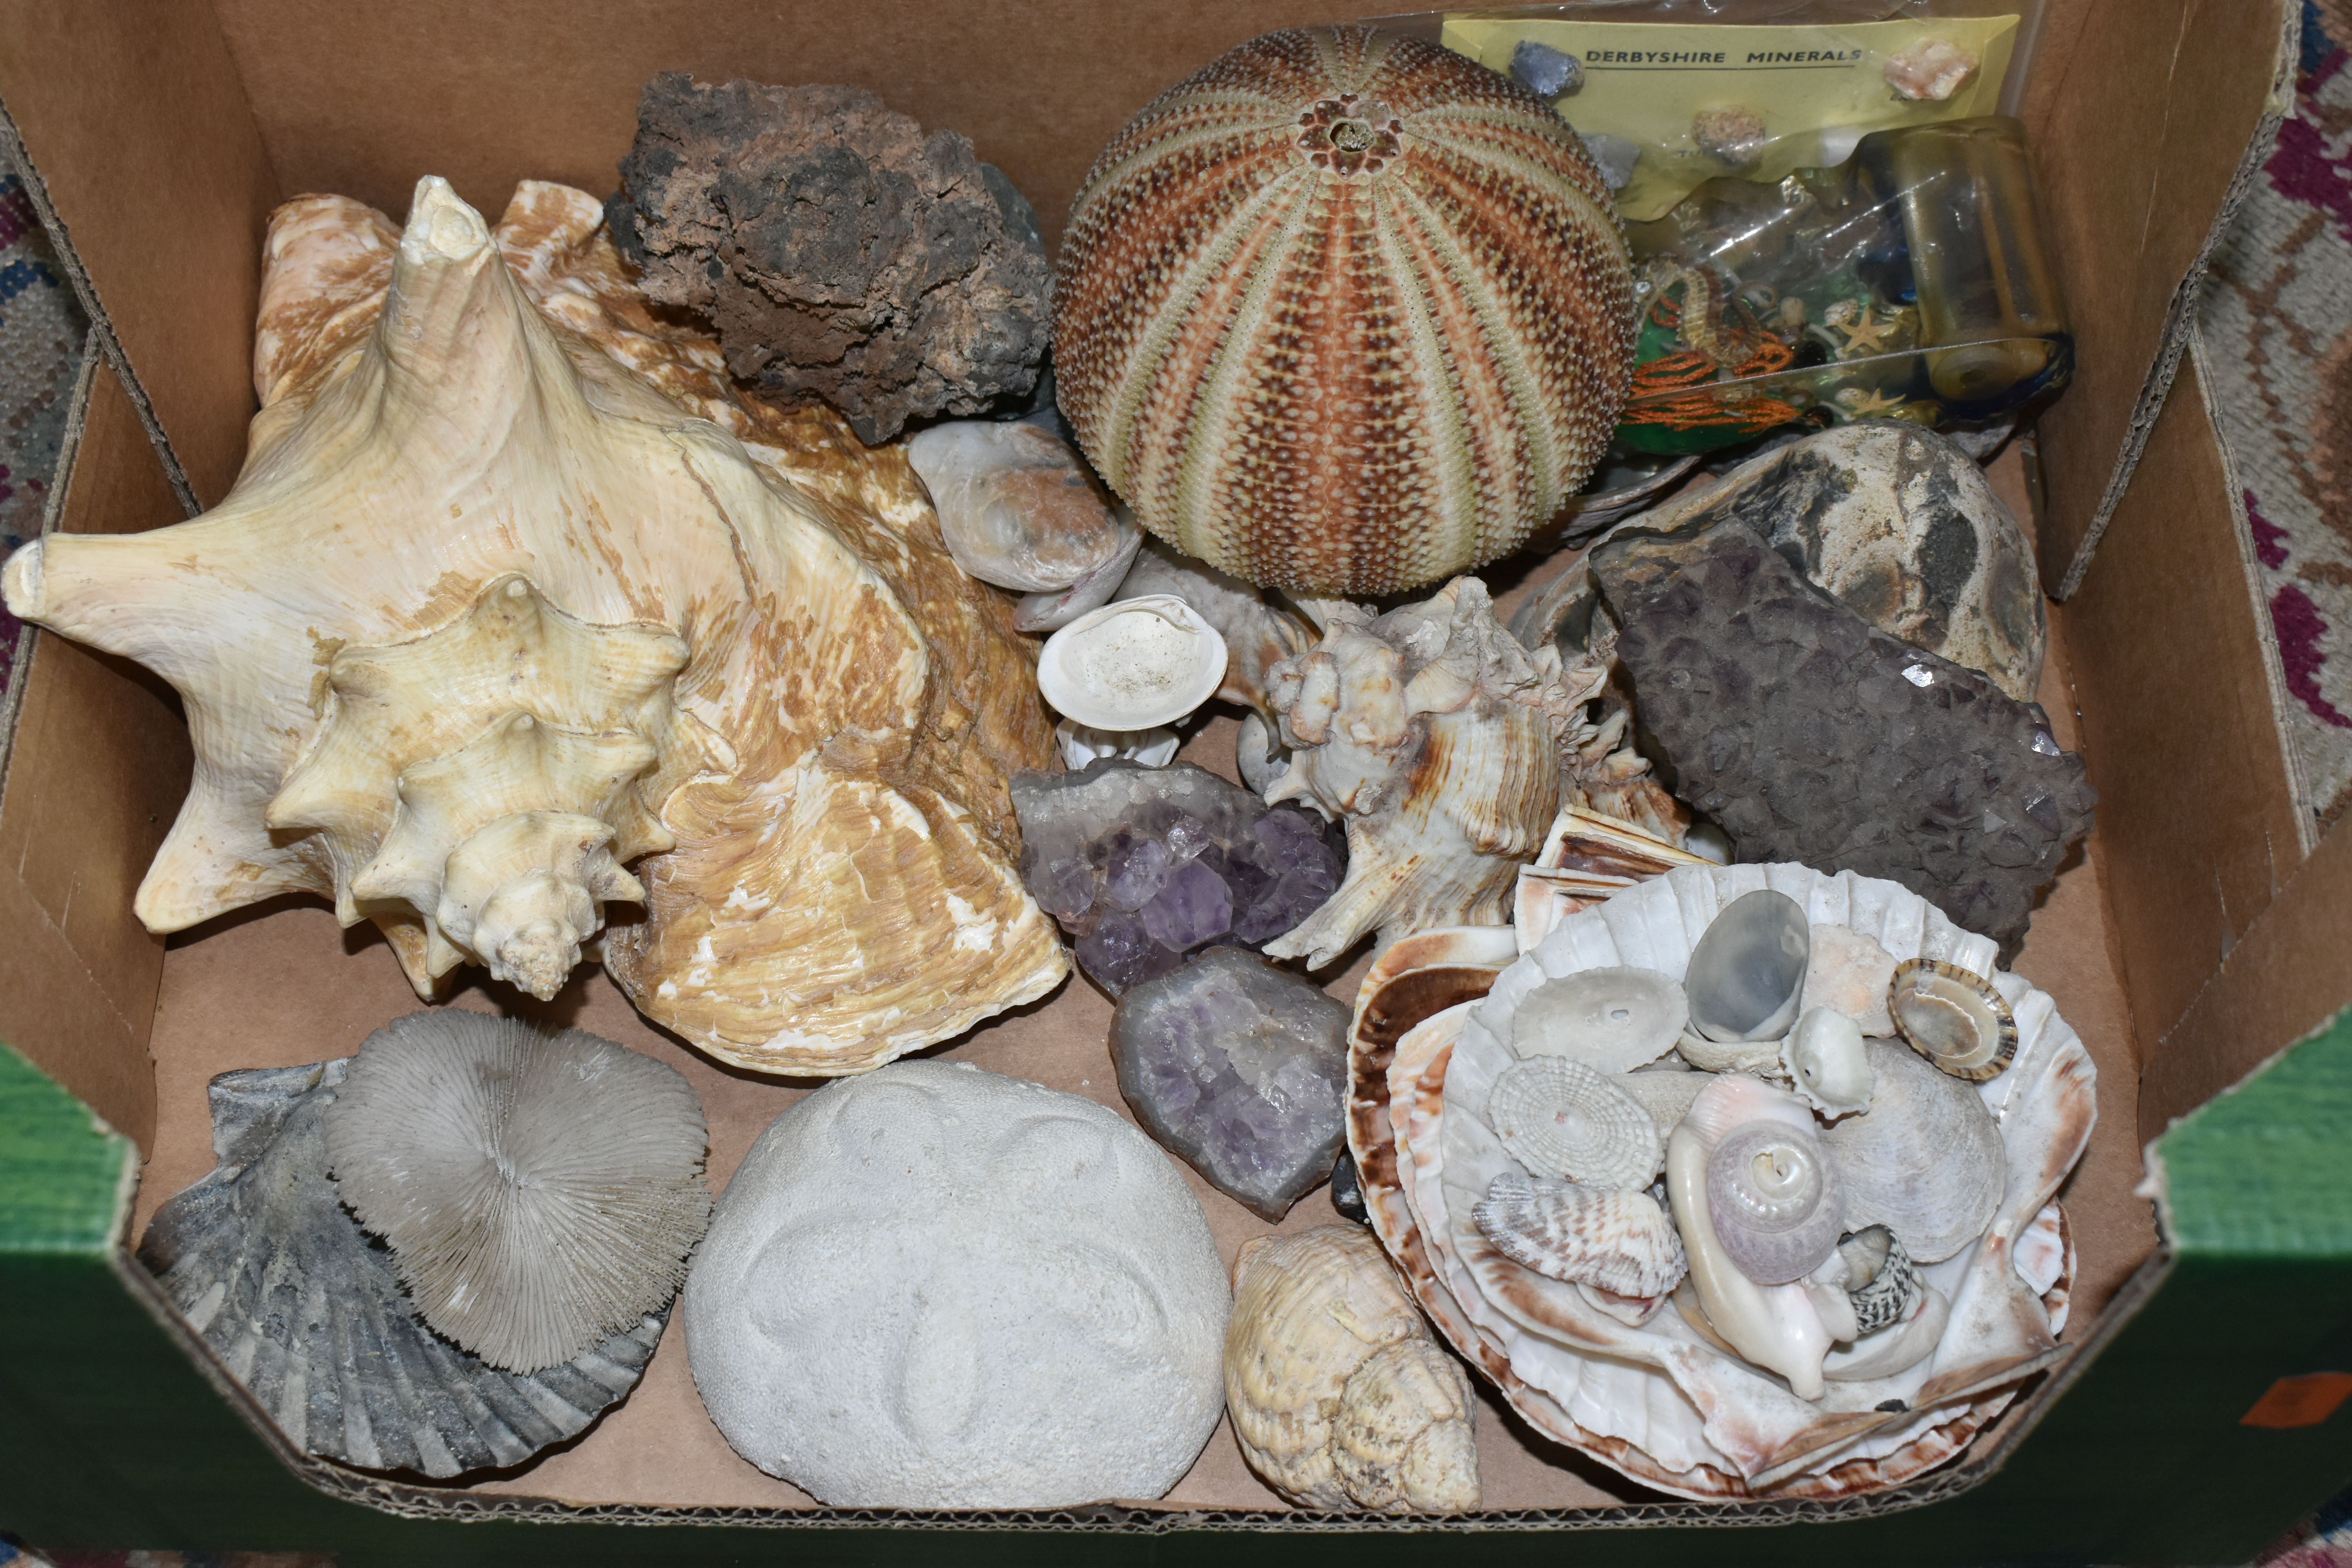 A BOX OF SEASHELLS, including a conch shell, scallop shells, together with a small quantity of